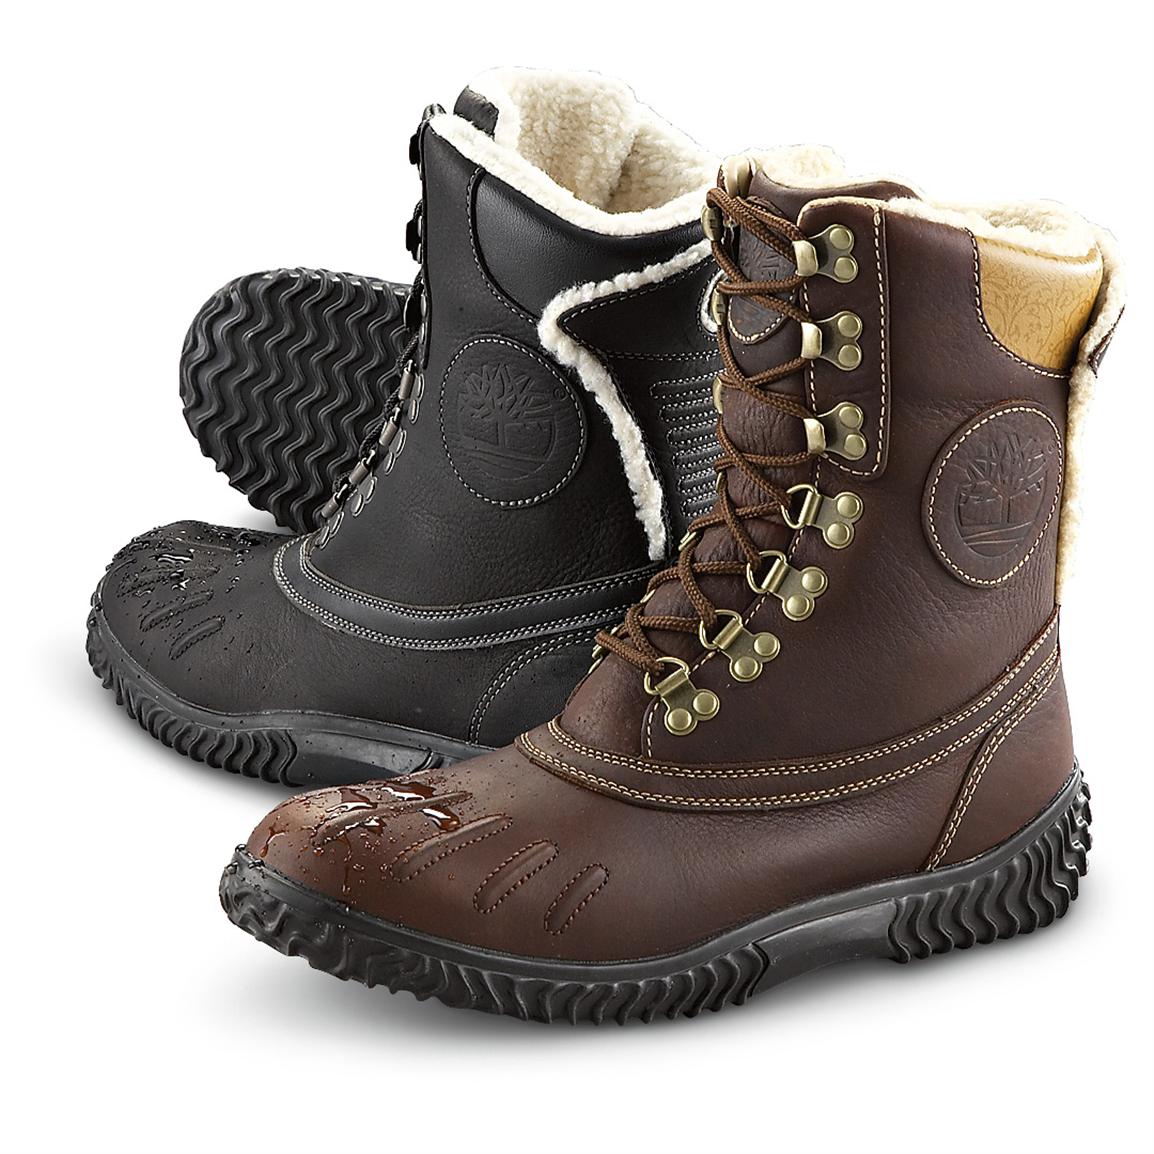 Men's Timberland® Waterproof Pak Boots - 146091, Winter & Snow Boots at Sportsman's Guide